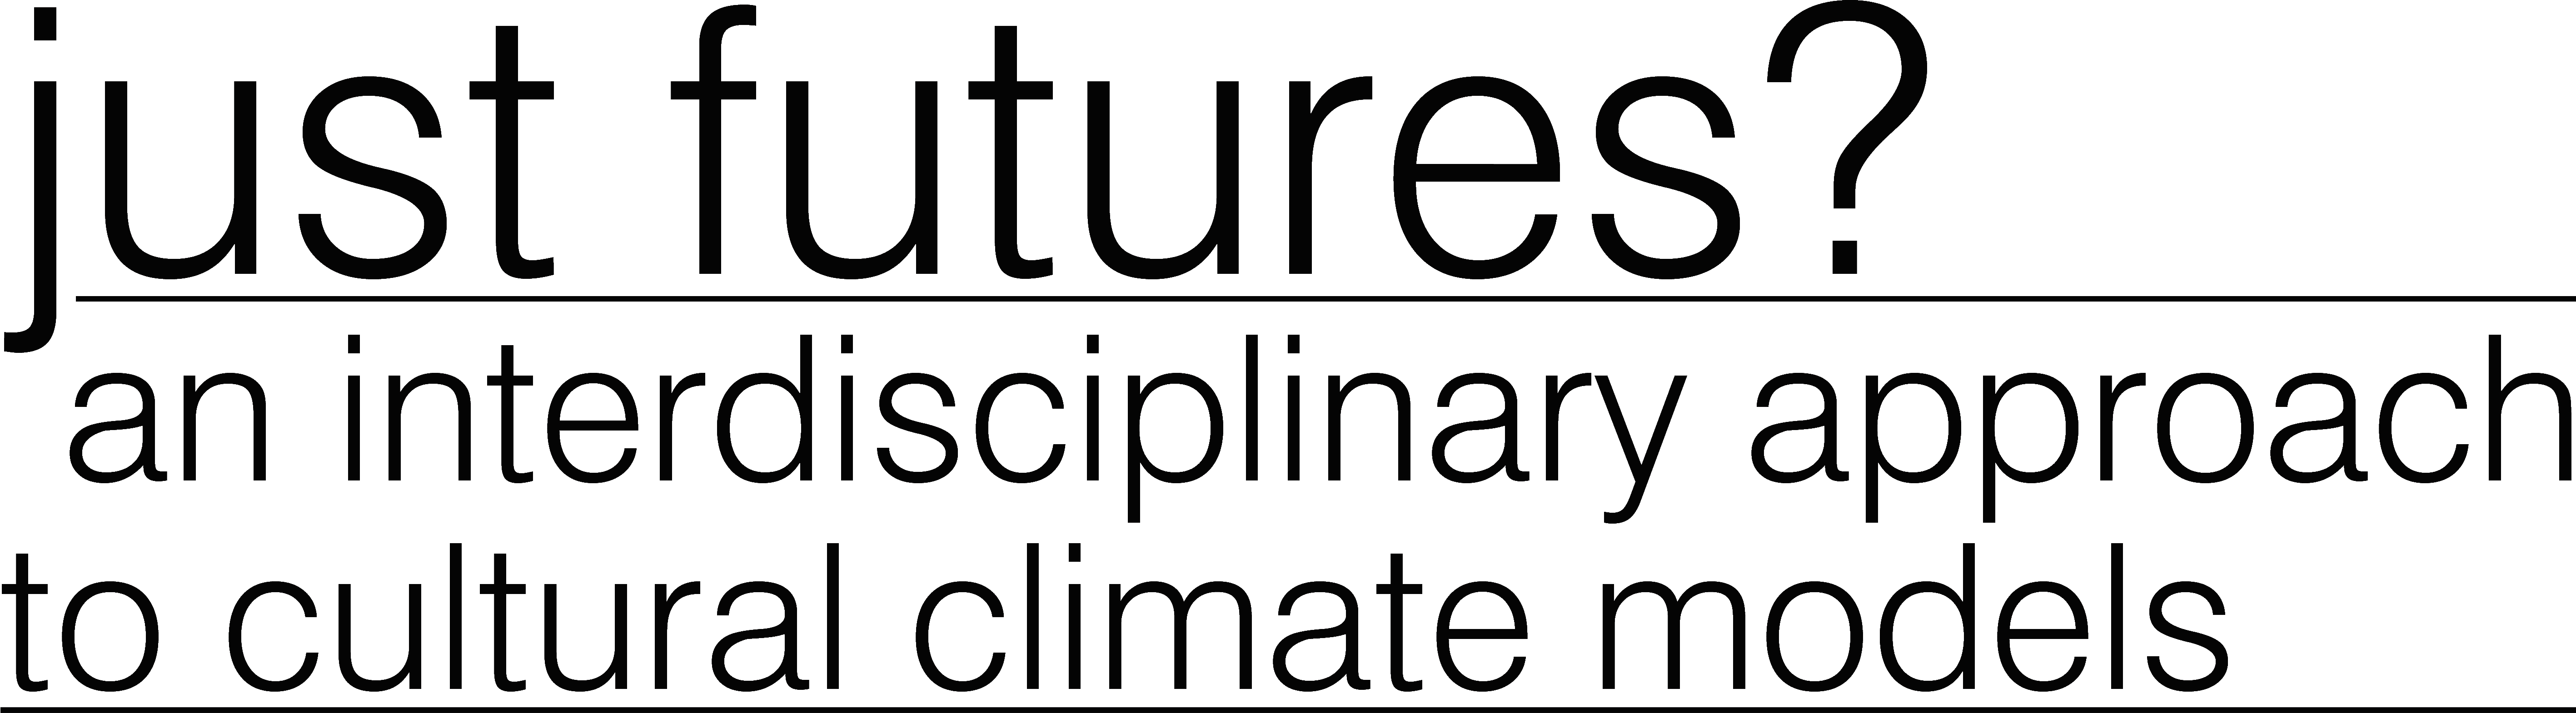 Just Futures. An
                                    interdisciplinary approach to cultural
                                    climate models.